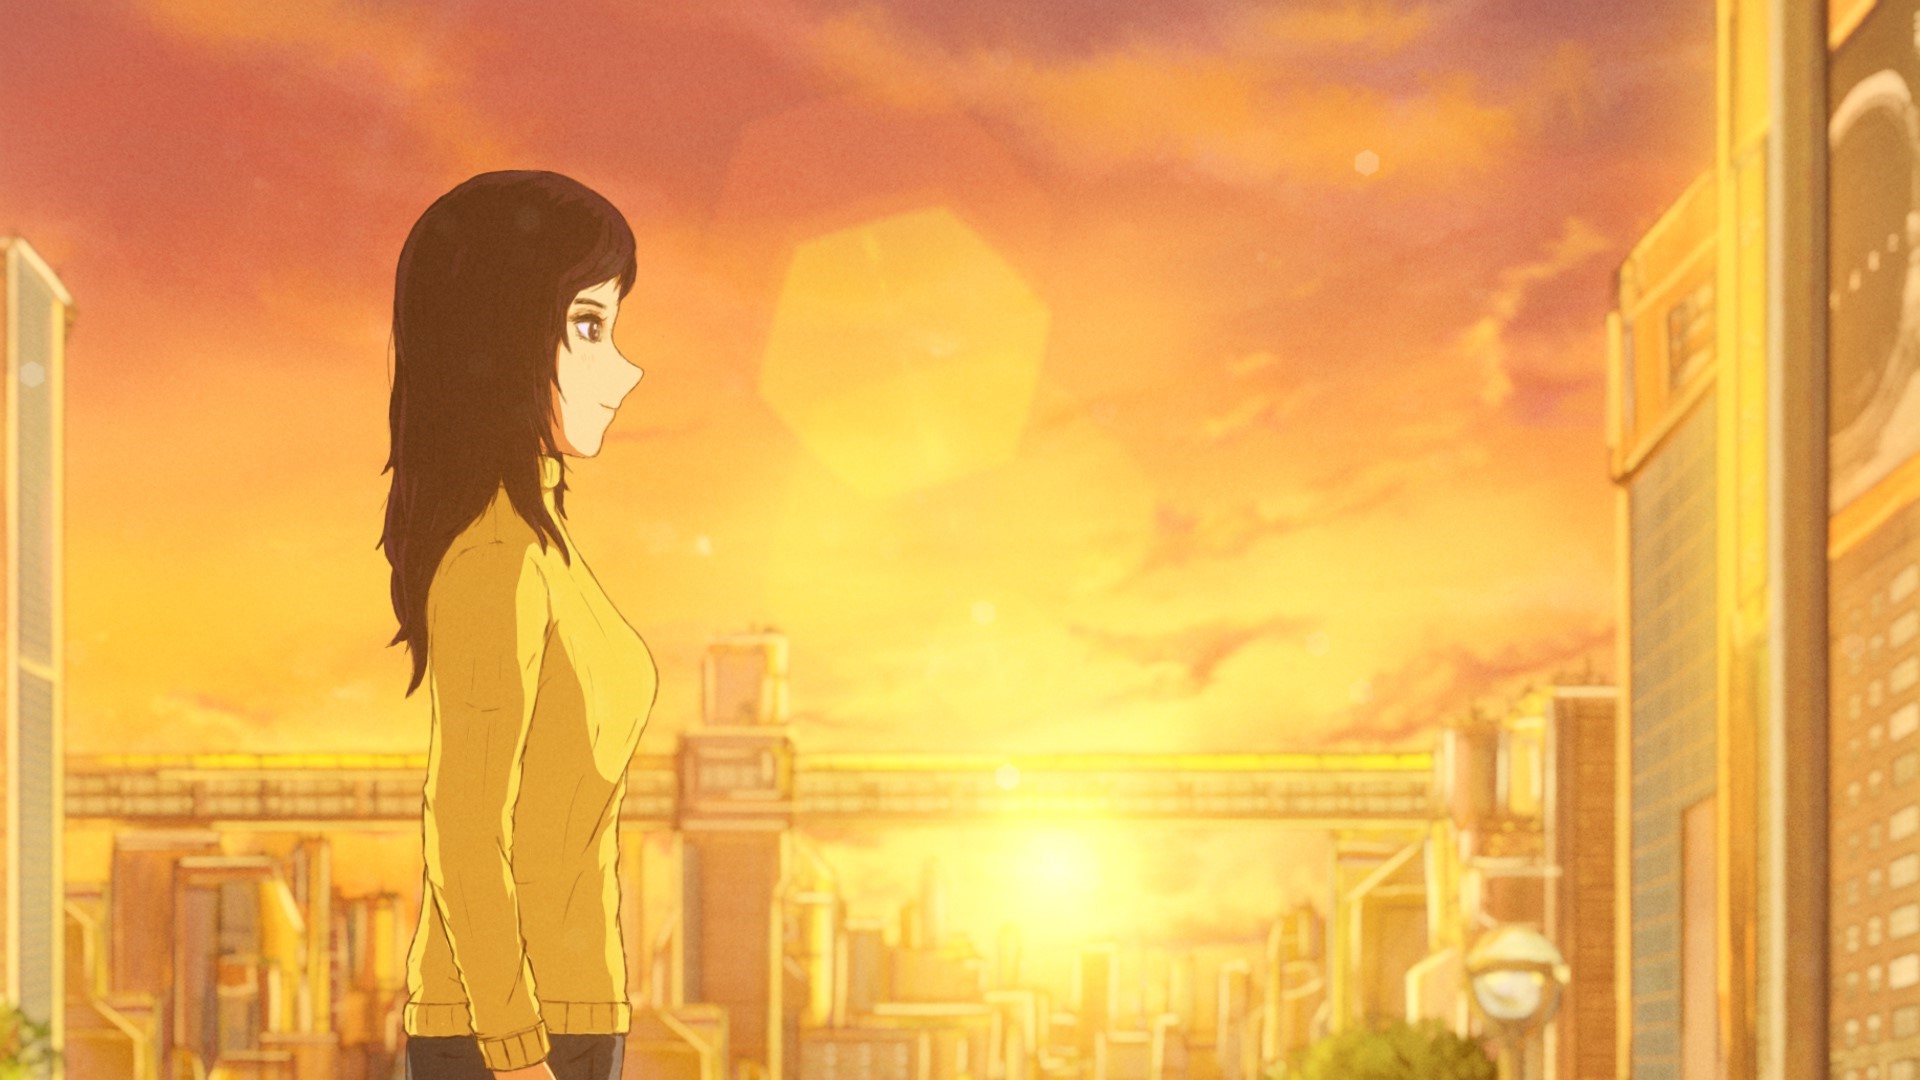 Anime 1920x1080 digital art anime city glowing sunset sky anime building cityscape anime girls smiling yellow sunset glow street outdoors sparkles side view yellow sweater